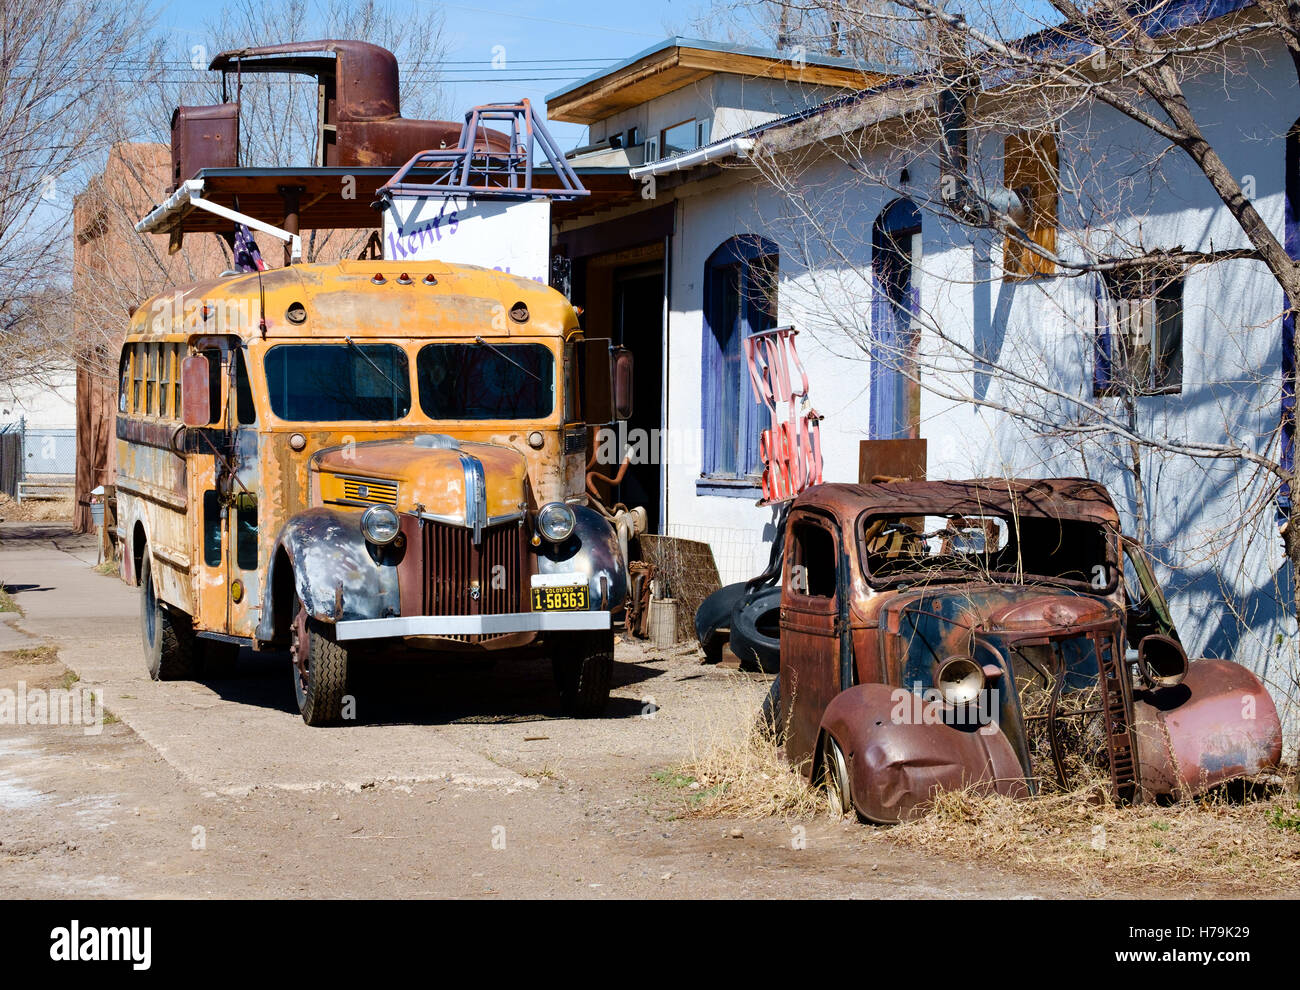 Old rusting yellow school bus and Chevy Pickup on the forecourt of Kent's Exhaust Shop in Alamosa, Colorado, USA Stock Photo